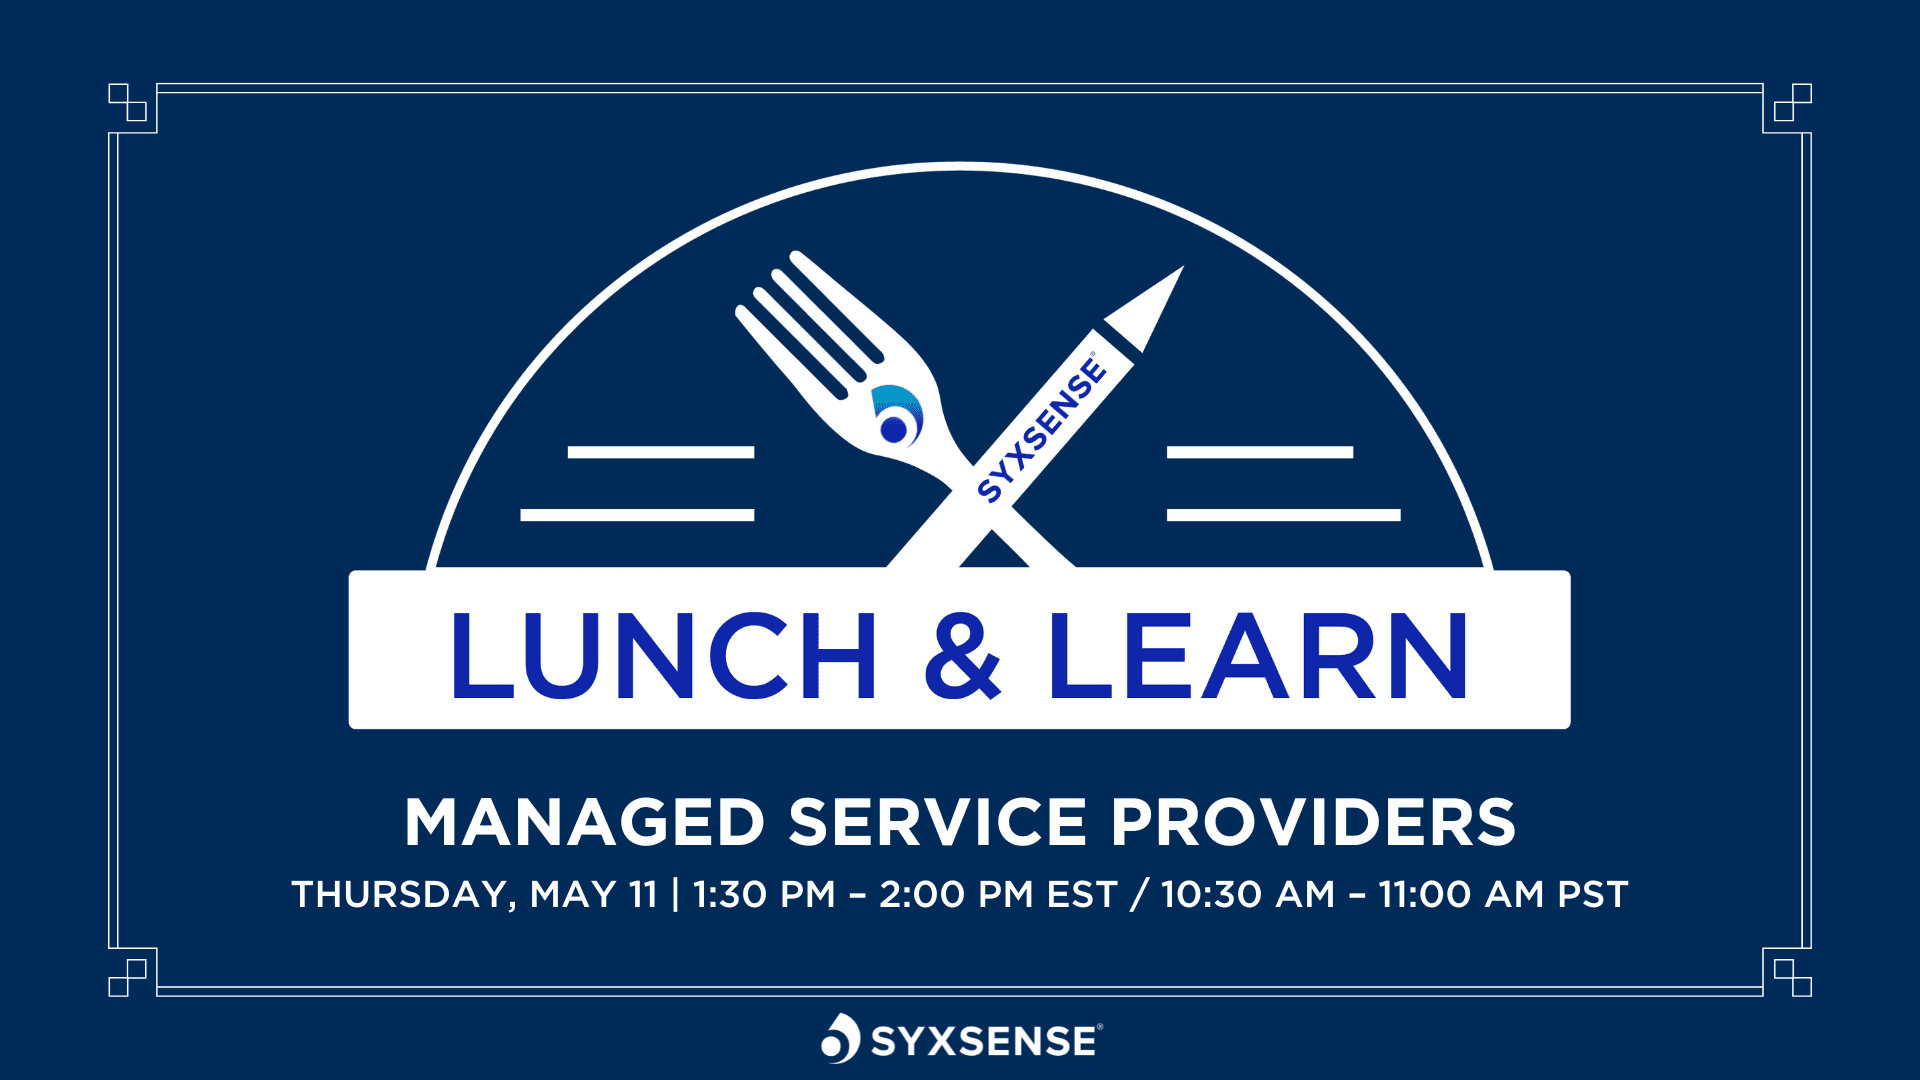 MSP Lunch and Learn from Syxsense